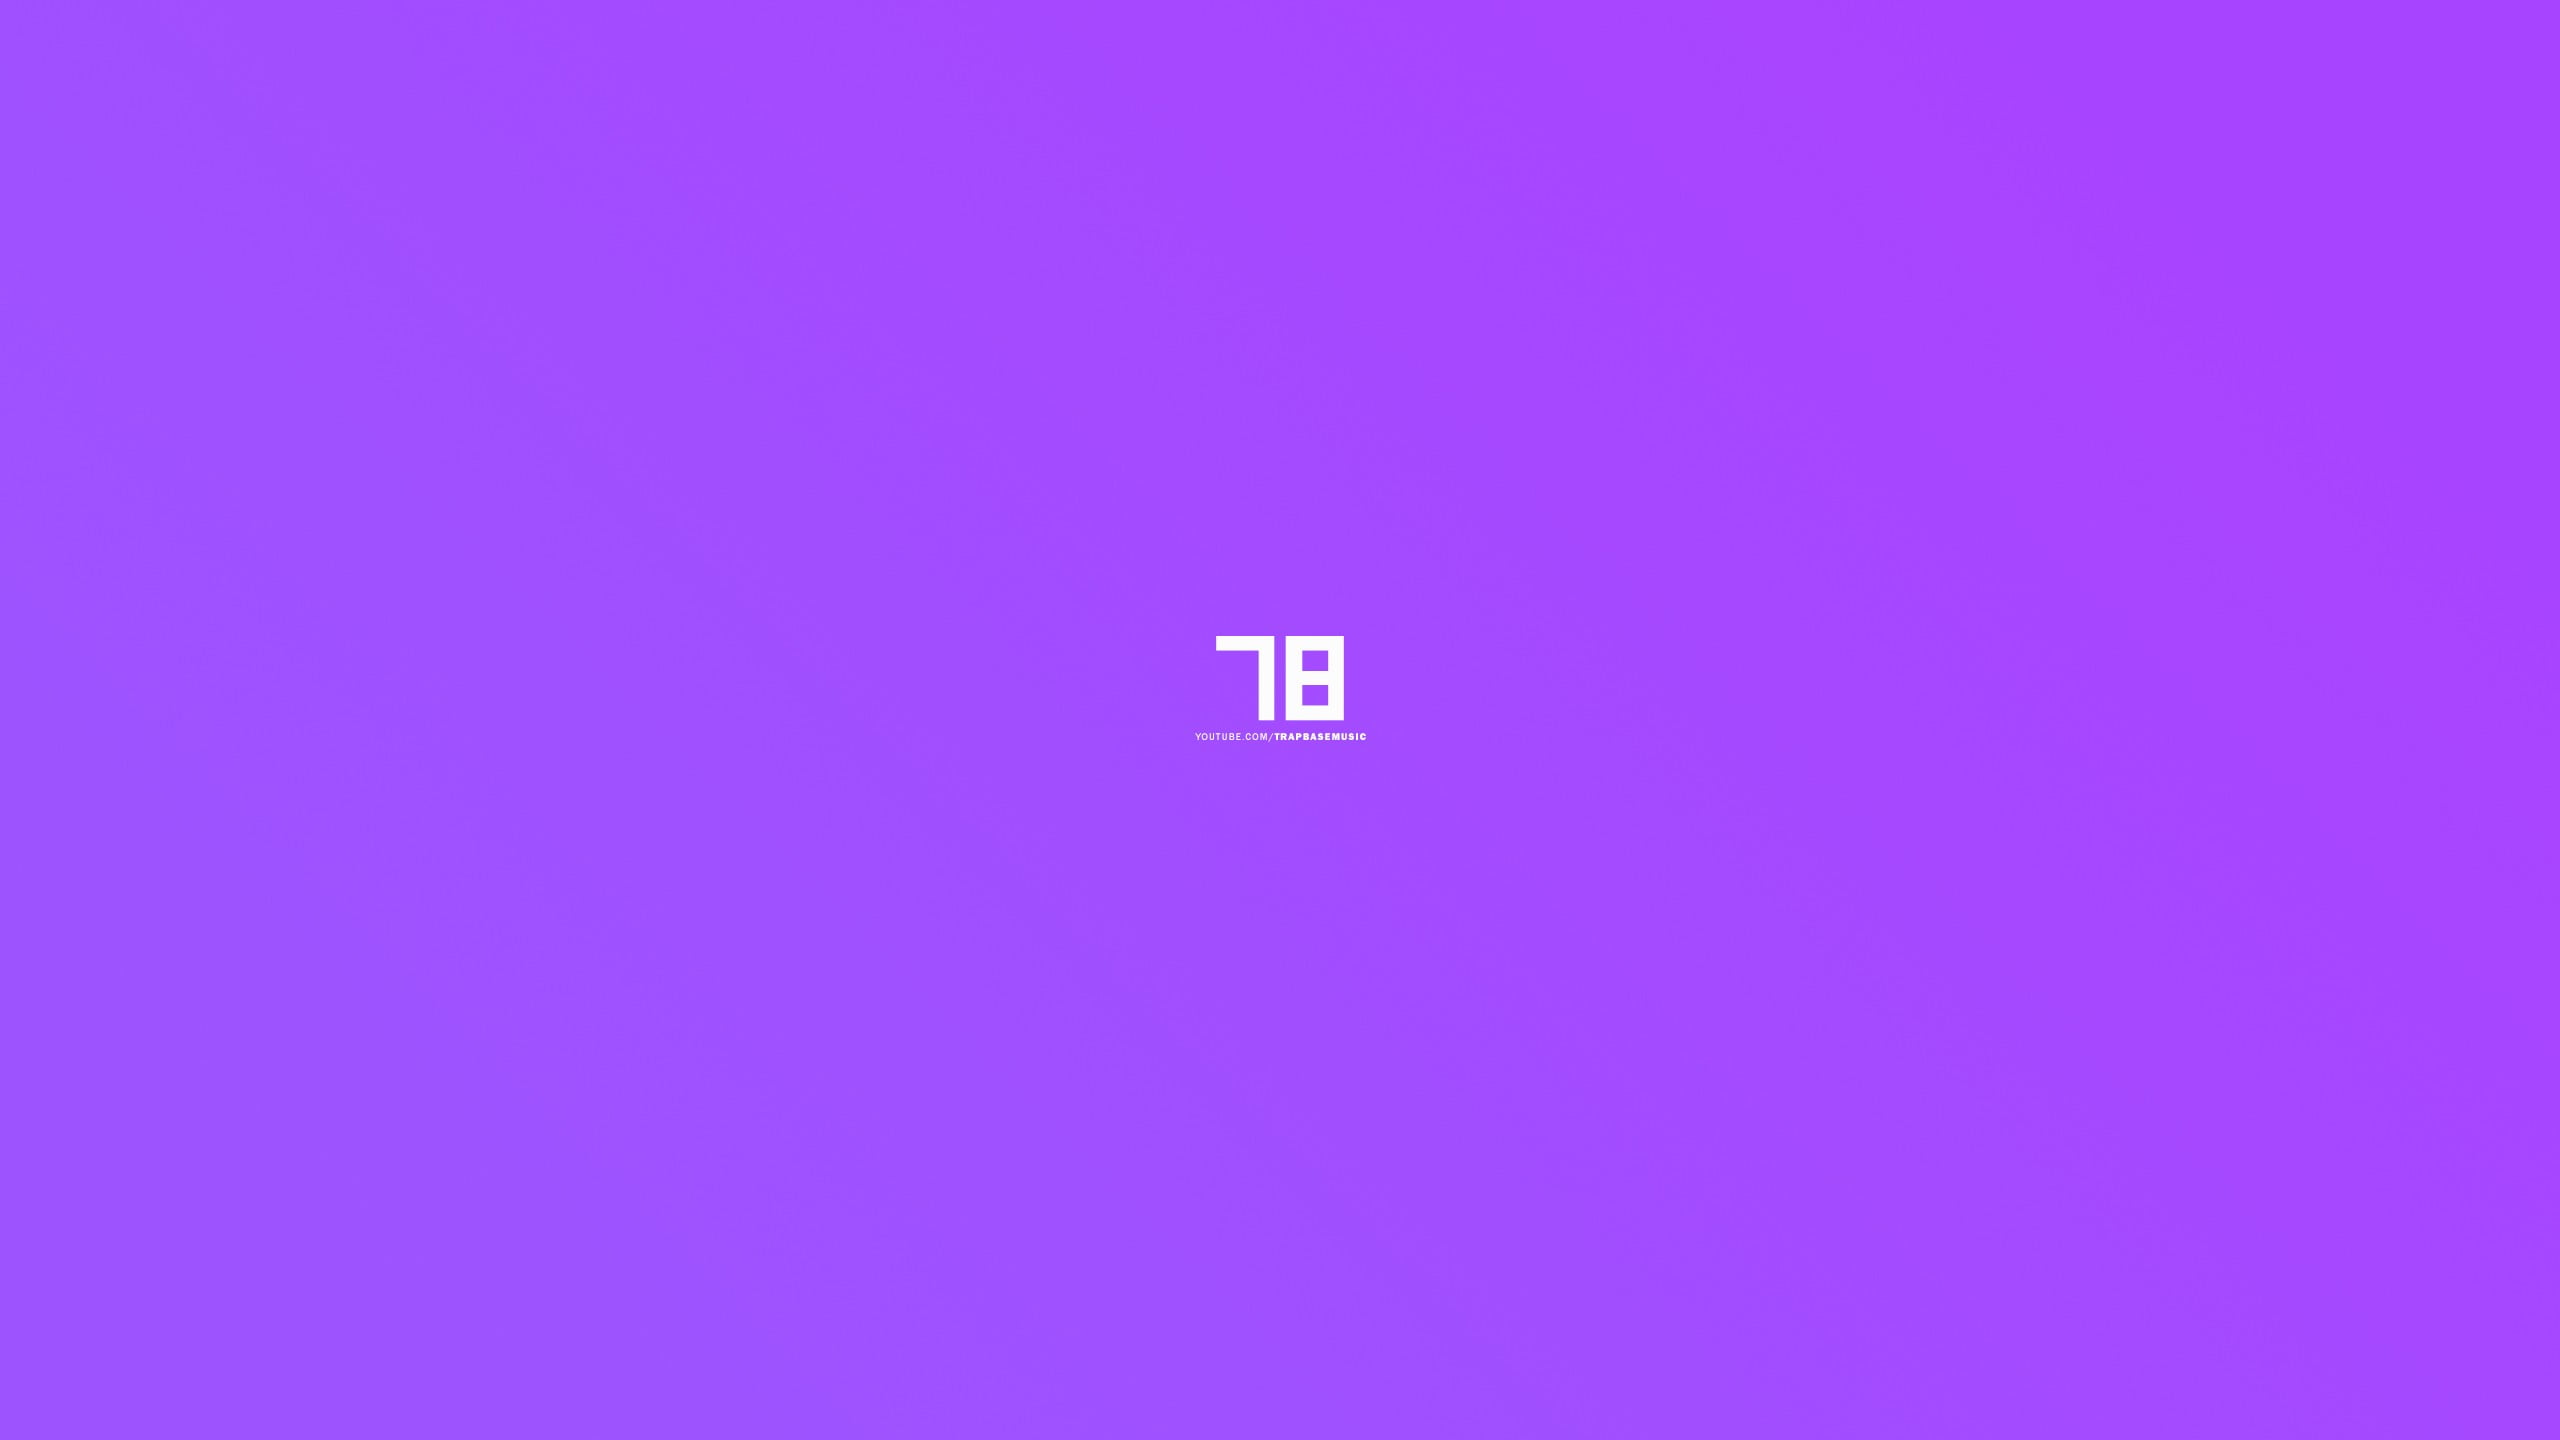 White 78 Text Minimalism Colorful Trap Nation Simple Hd